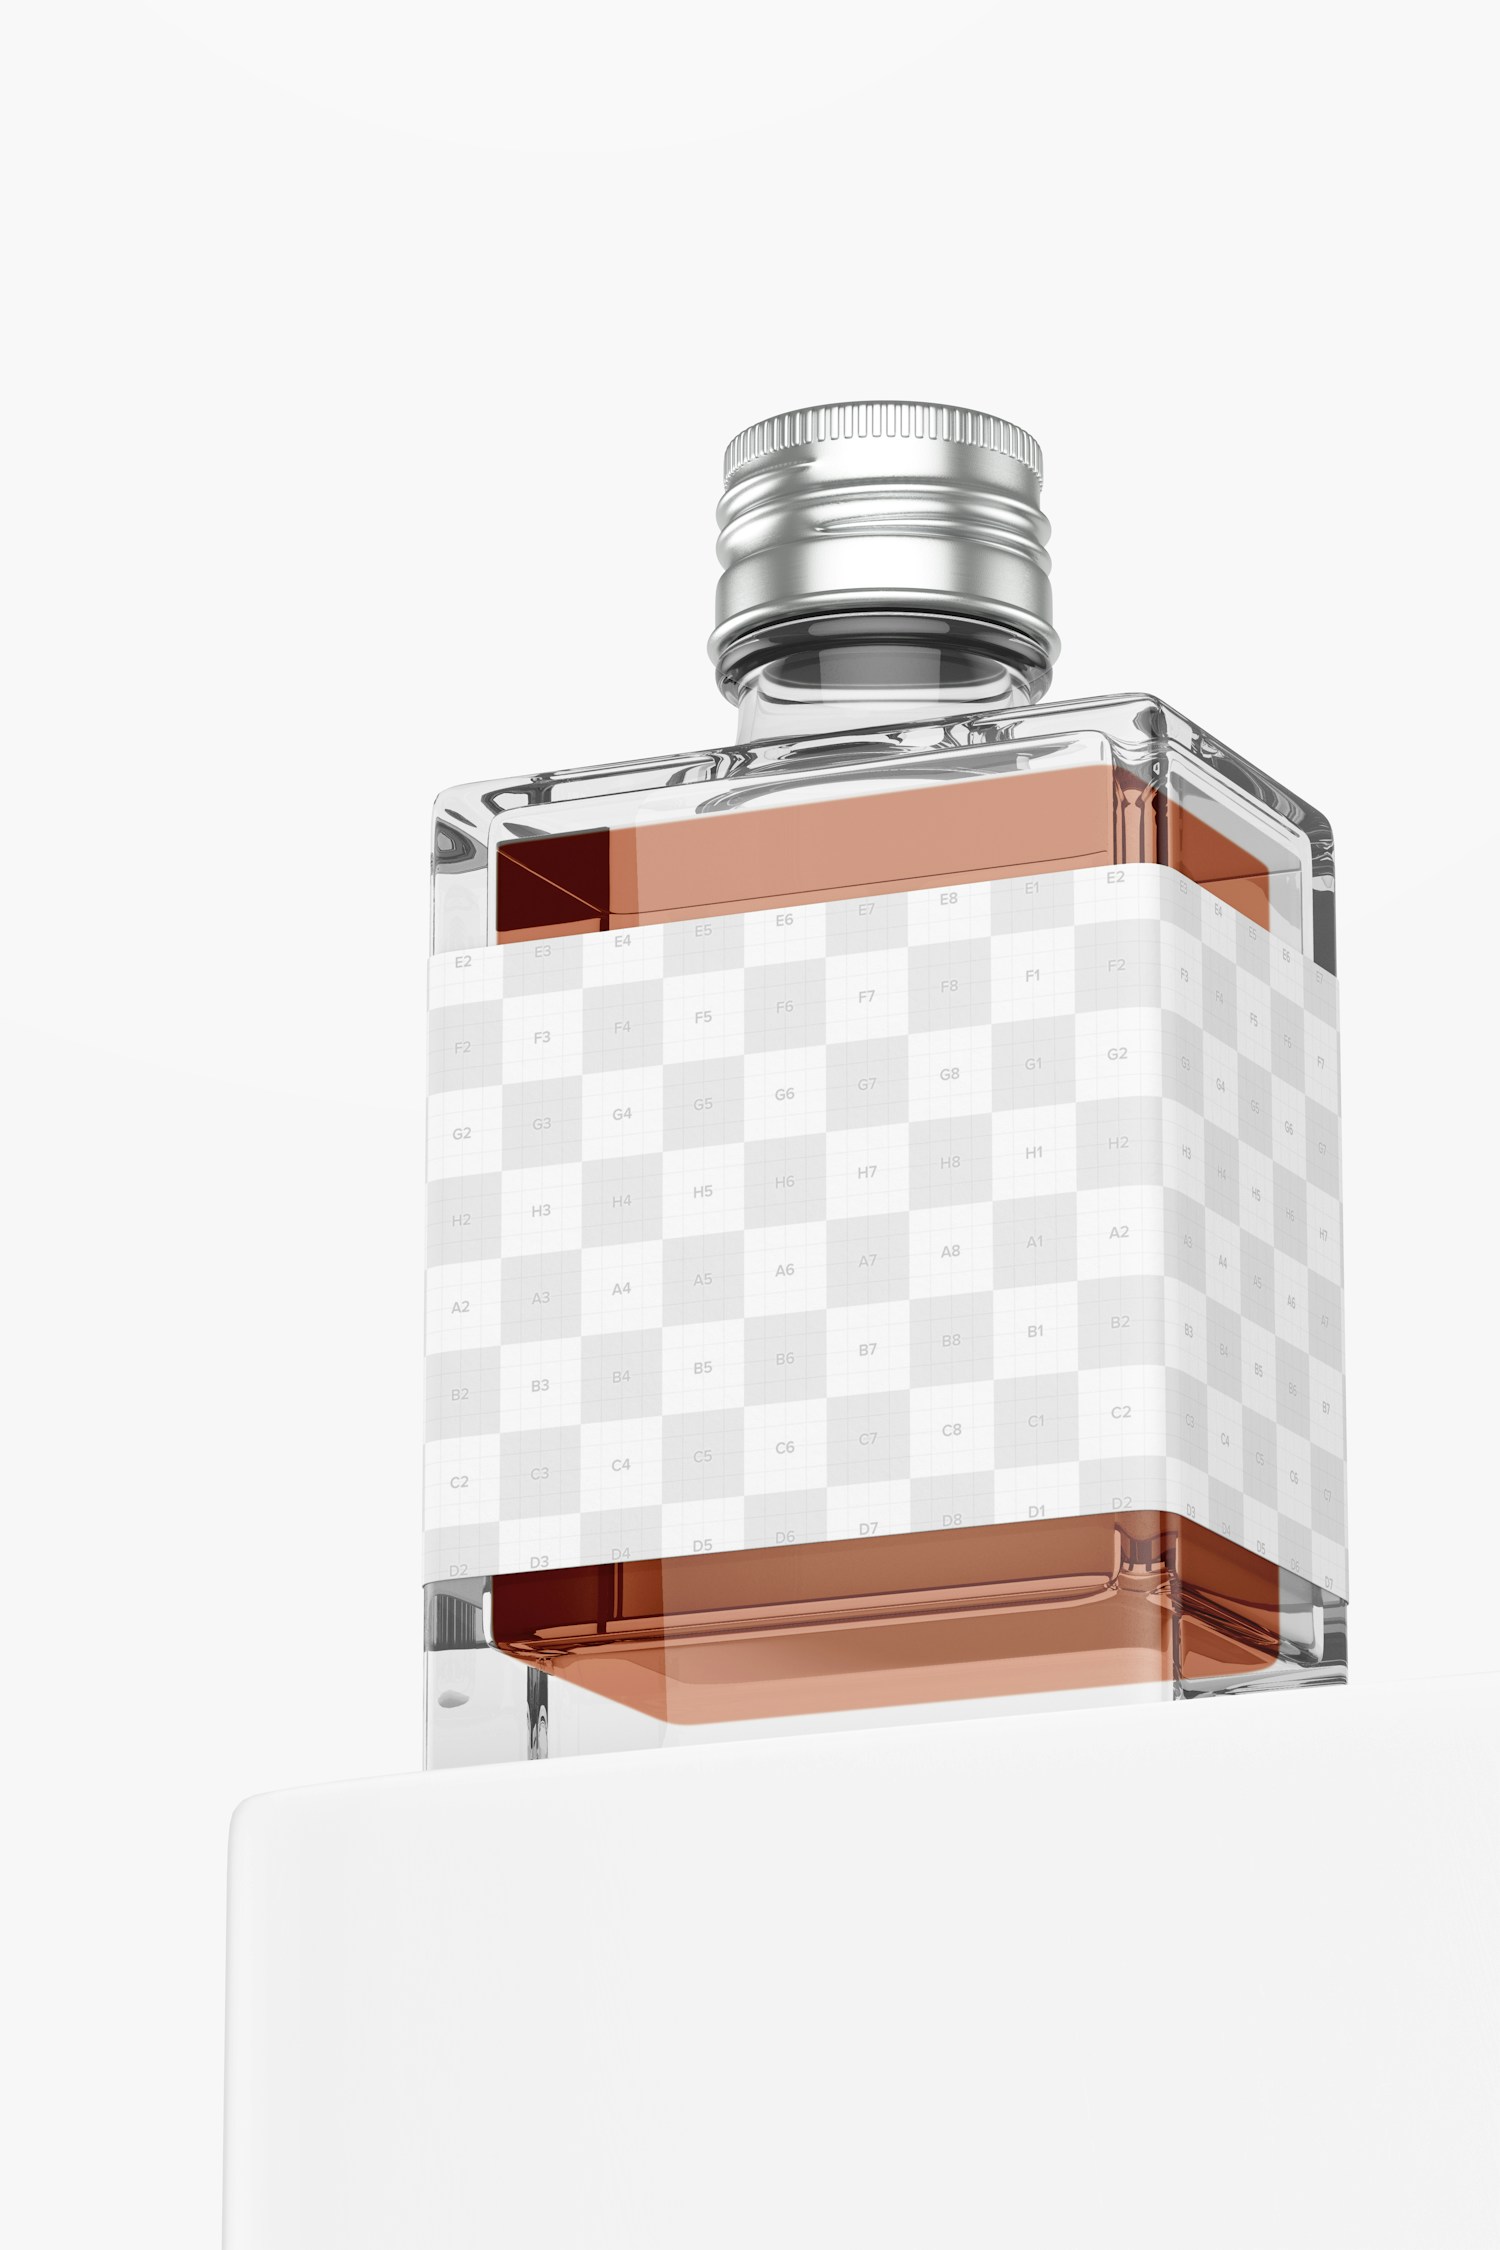 Square Cocktail Bottle Mockup, Low Angle View